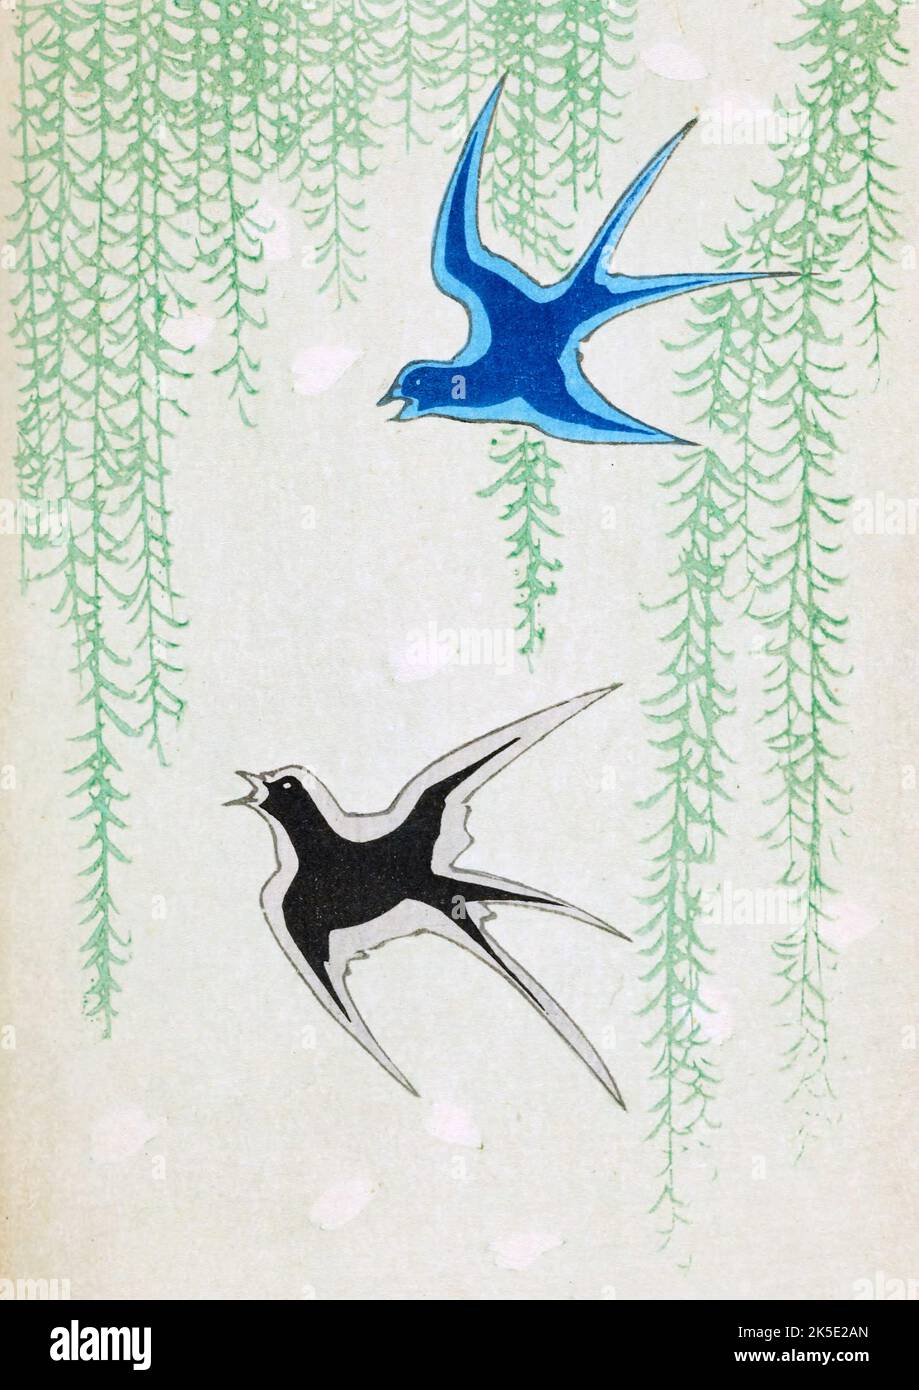 Design with birds and plants. The Japanese language Shin-Bijutsukai design magazine 1901-1902, was edited by illustrator and designer Korin Furuya (1875-1910) and contained the designs of the best artists of the time. A Meji painter, Korin taught at the Municipal School of Arts and Crafts, and was one of the most important woodblock print designers of the time. An optimised and enhanced print from Shin-Bijutsukai Design Magazine, Volume 1. Stock Photo